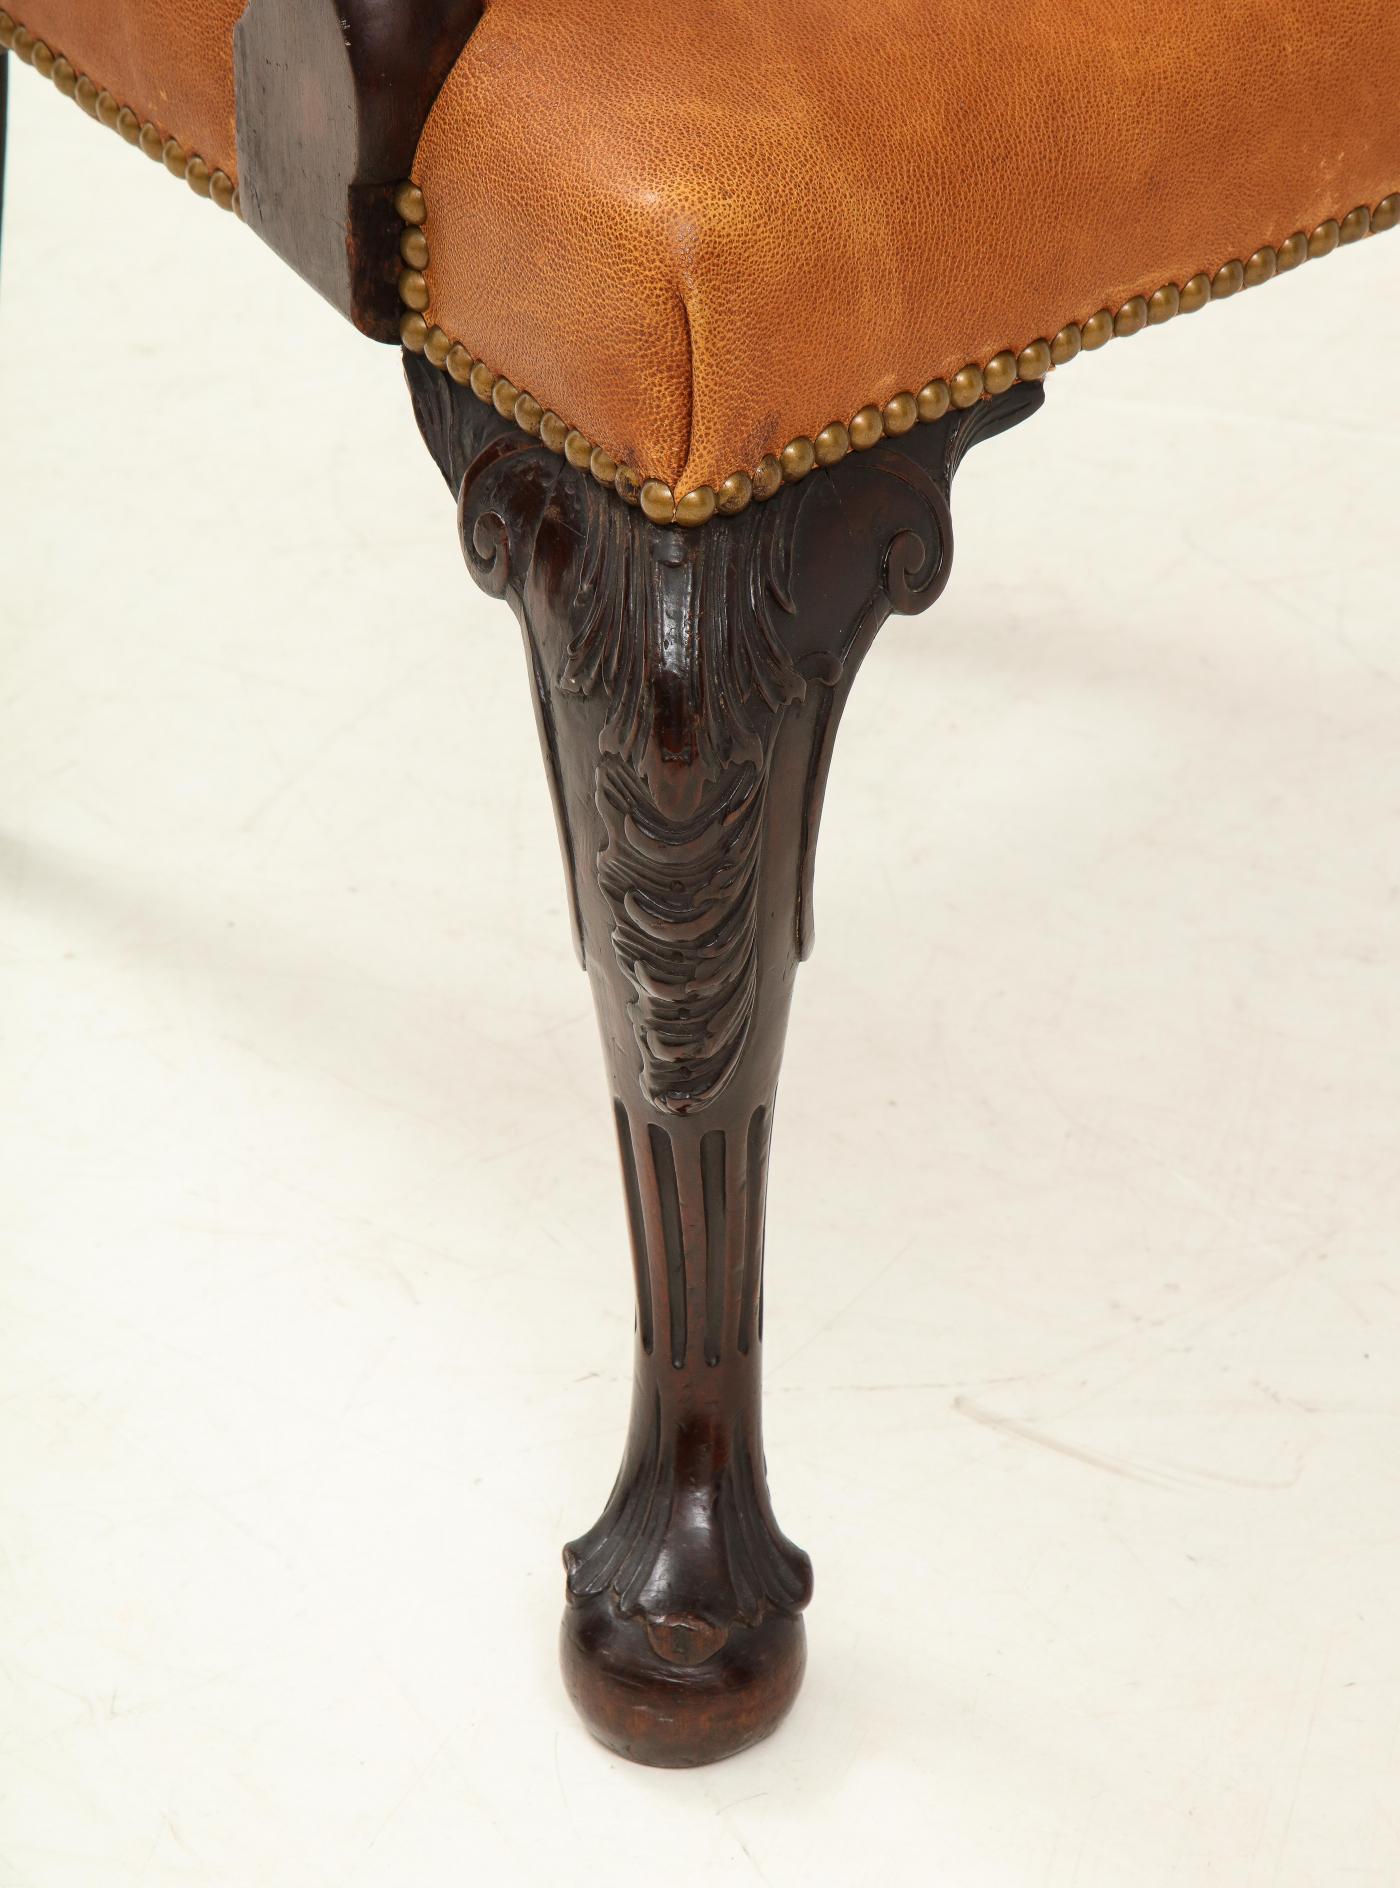 A suberb George II/III carved mahogany open armchair having a carved crest rail over an open carved back splat, upholstered seat with cabriole legs terminating in an unusual ball foot. The fluting on the legs is similar to fluting found on chairs